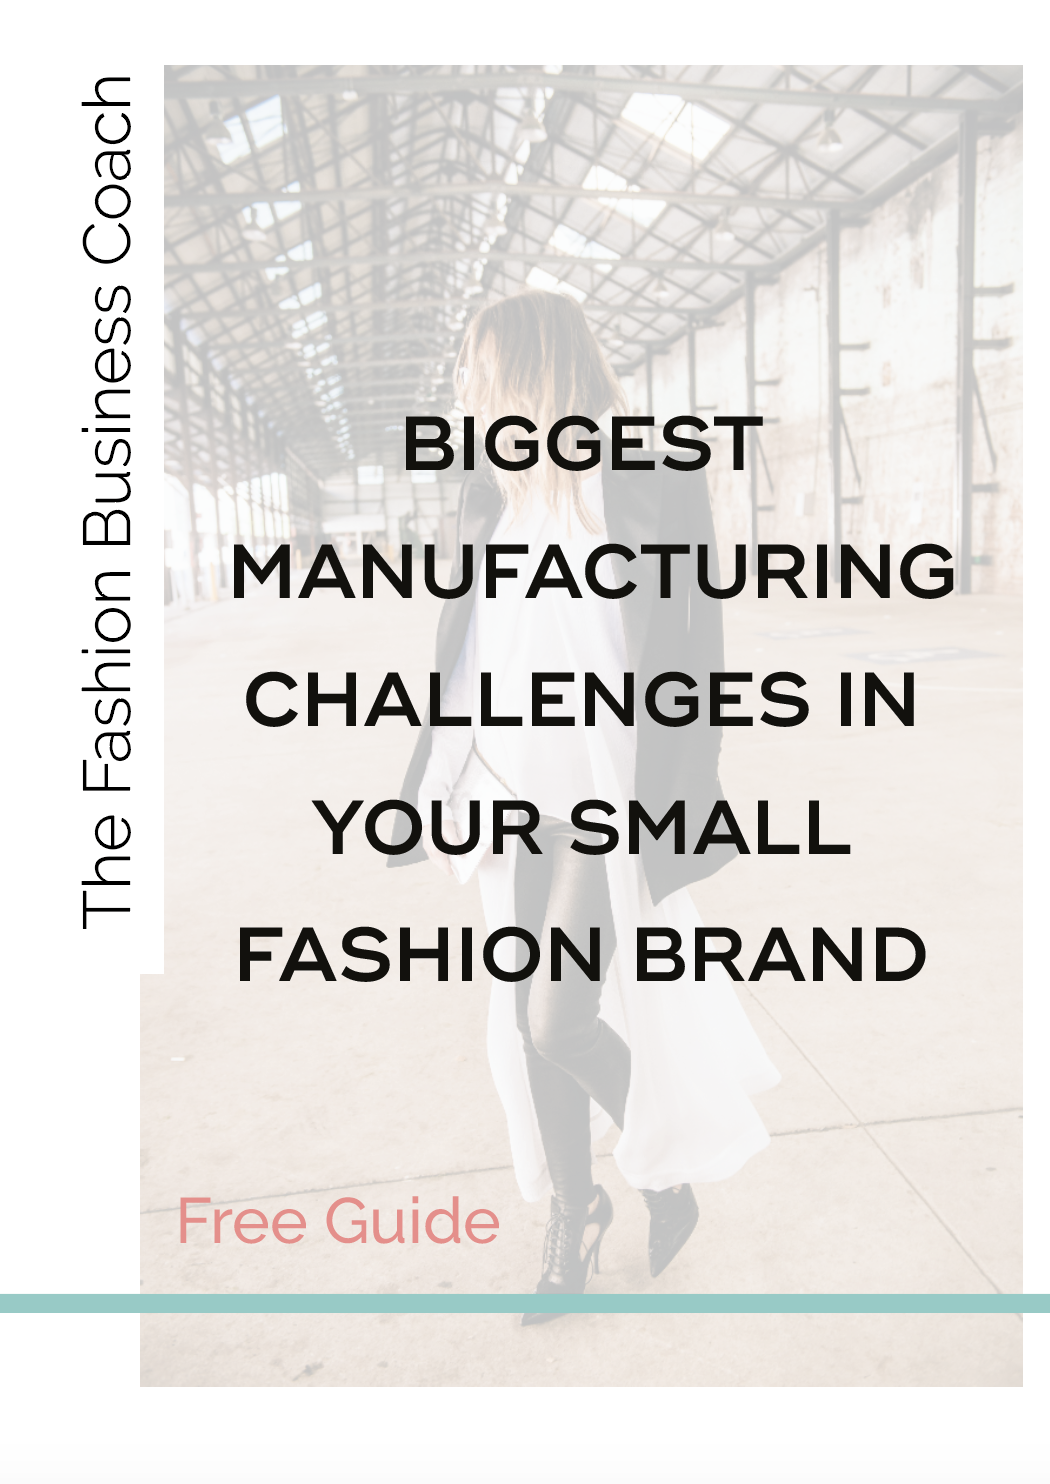 Manufacturing Fashion Products - The Biggest Challenge Startups Face ...